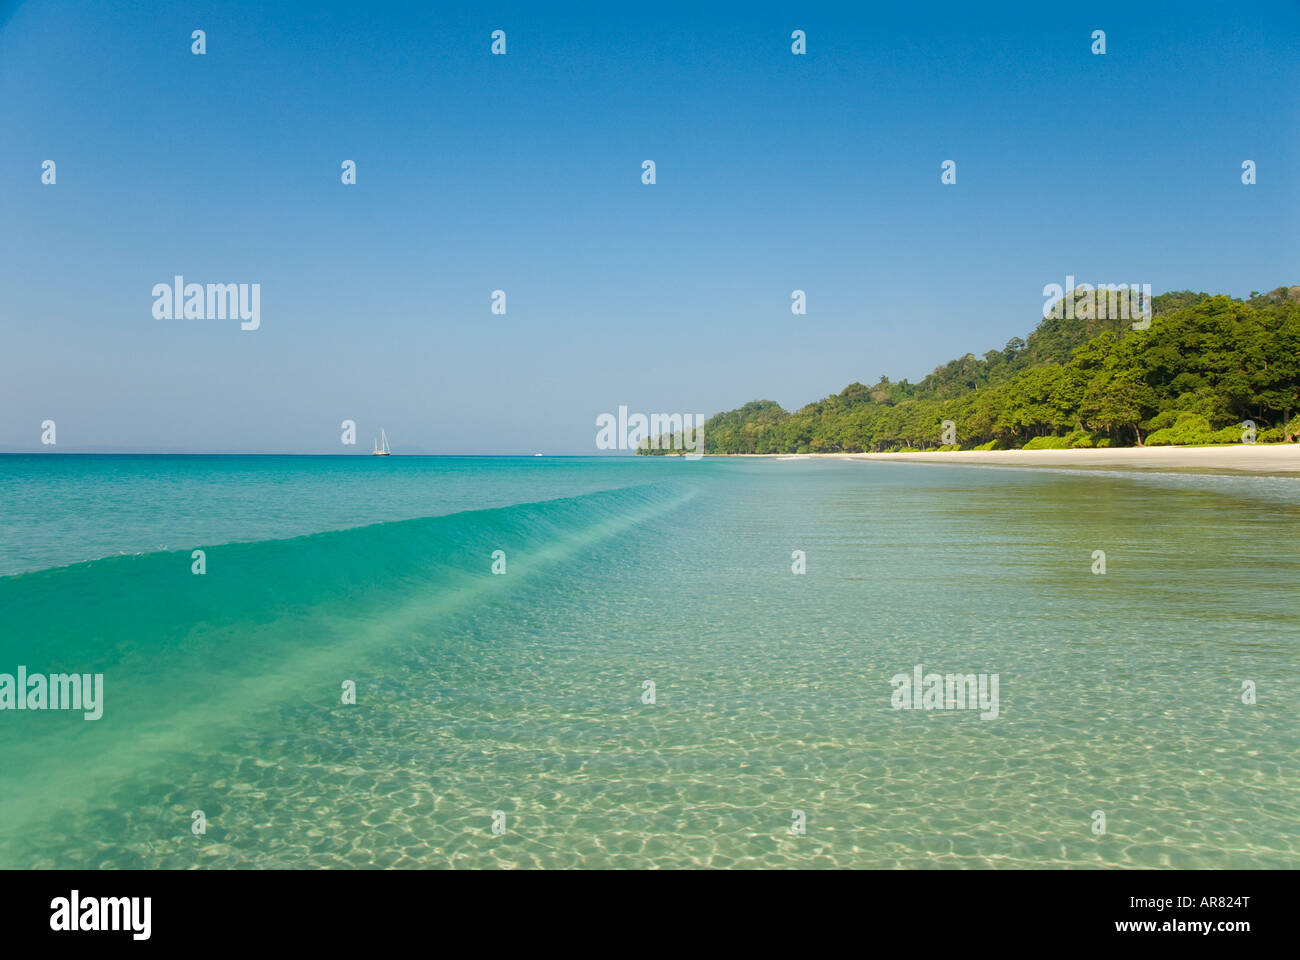 Beach number seven on Havelock Island in the Andaman Islands in India Stock Photo